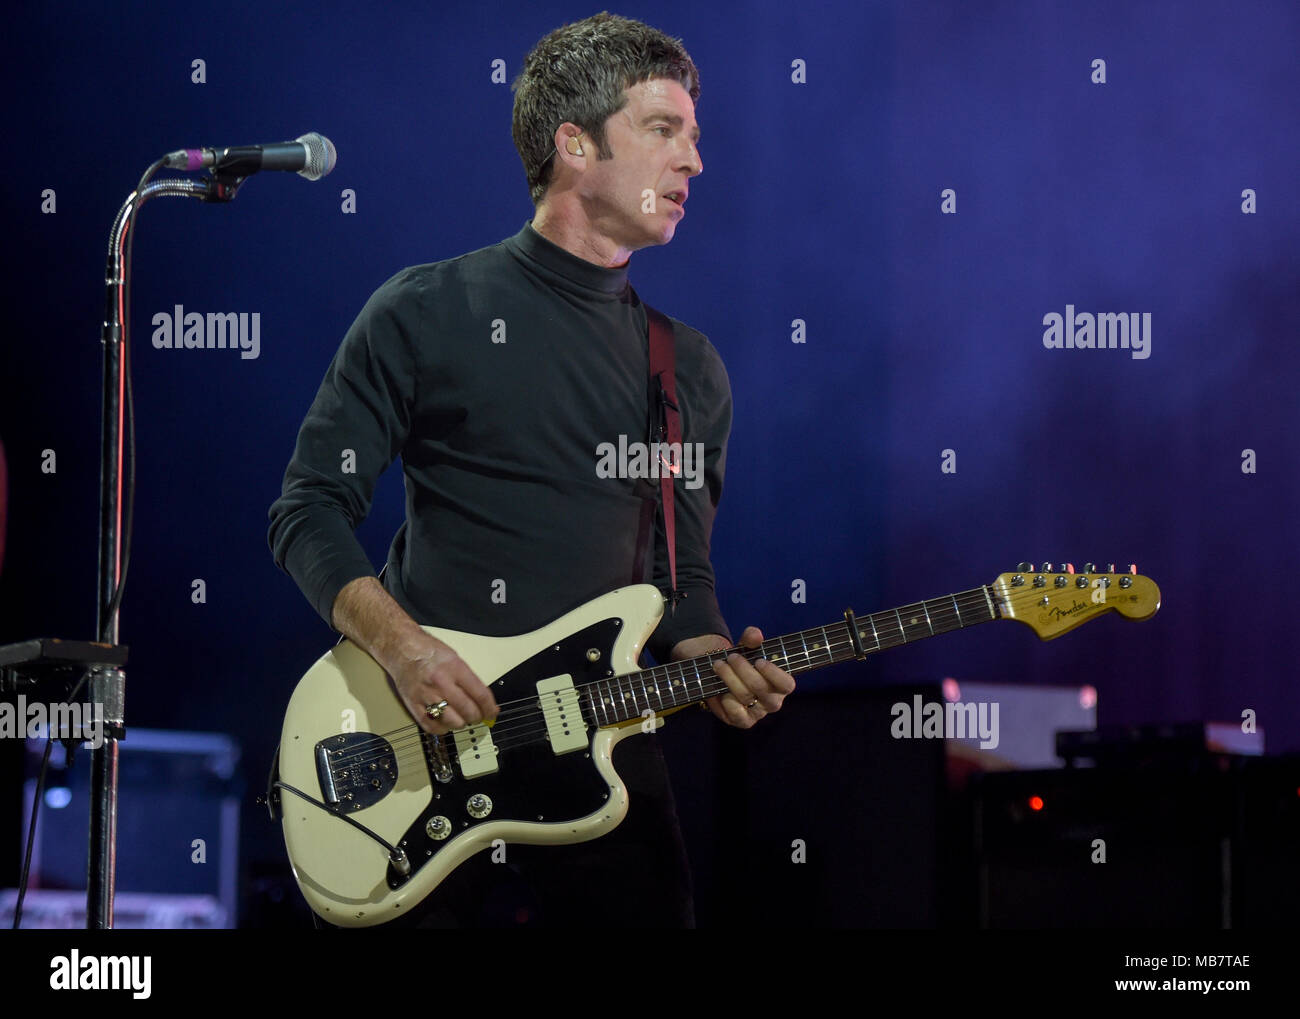 Hamburg, Germany. 08 April 2018, Germany, Hamburg: The British singer and songwriter Noel Gallagher, one of the founders of the band Oasis, standing on the stage at the Mehr! theatre at the kick-off of his tour. Gallagher and his band High Flying Birds will also play in Duesseldorf (9.4.), Munich (12.4.), Berlin (16.4.) and Wiesbaden (17.4.). Photo: Axel Heimken/dpa Credit: dpa picture alliance/Alamy Live News Stock Photo